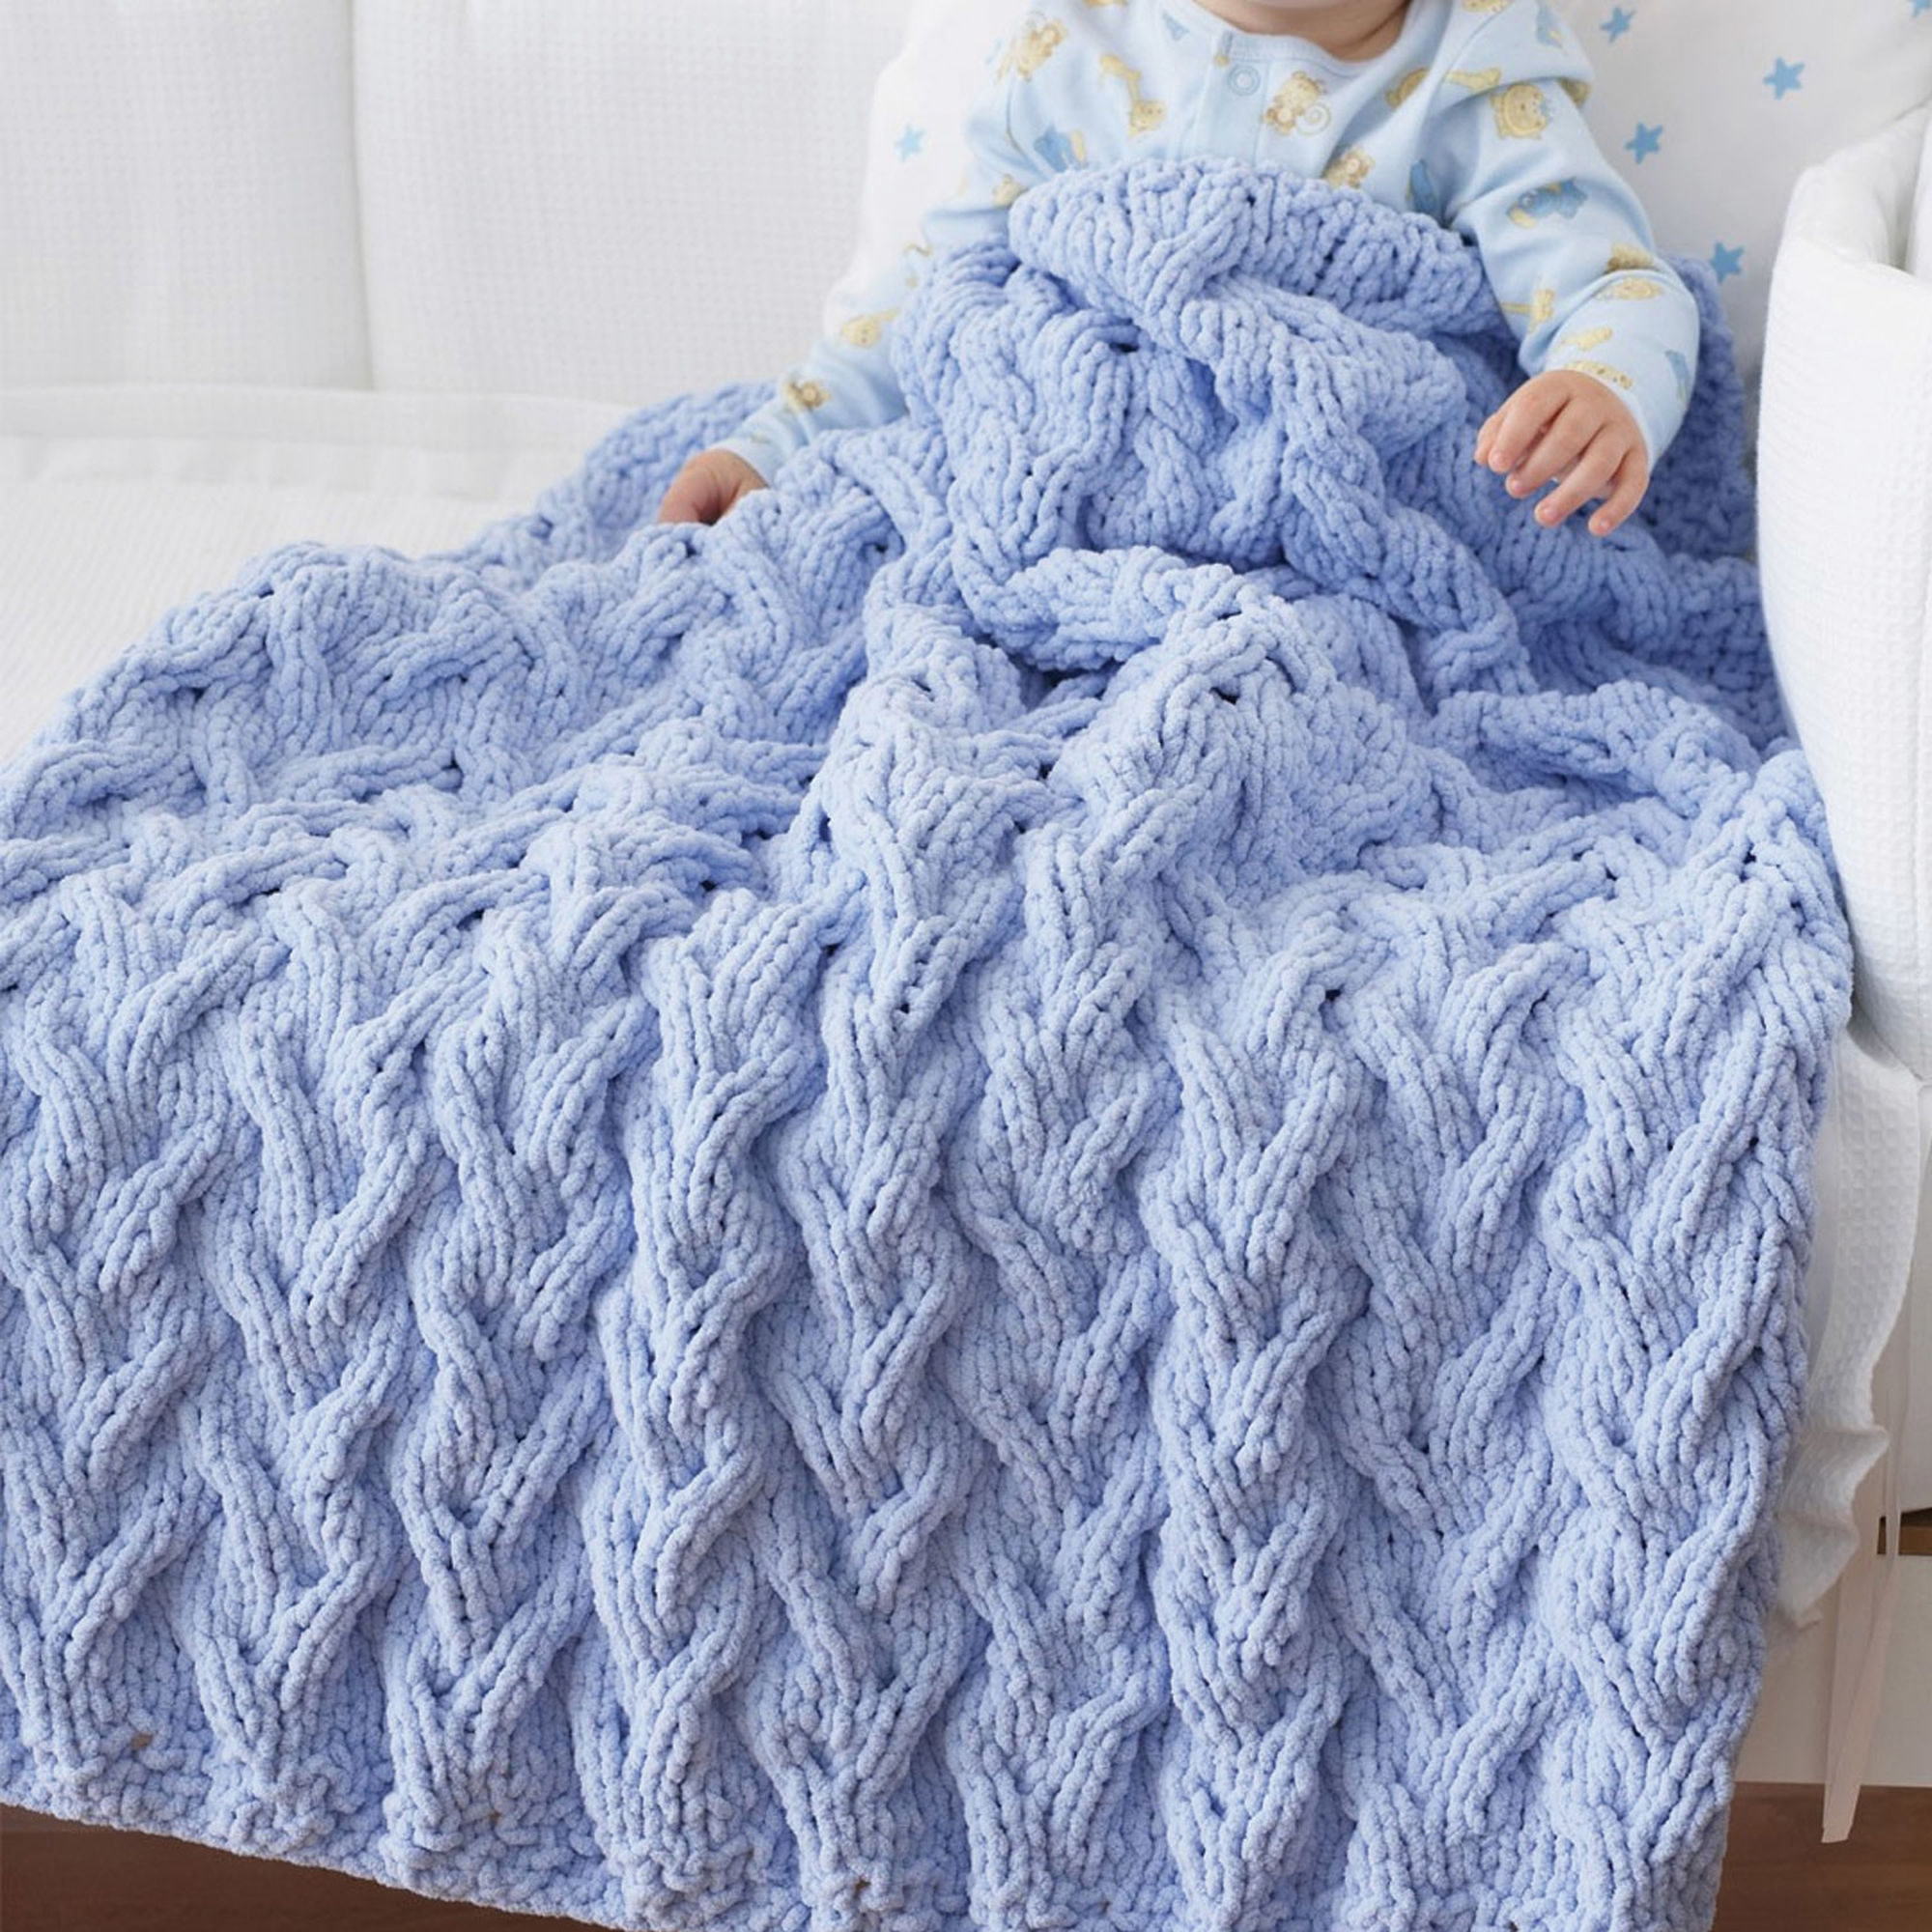 Afghan Knitting Pattern Lovely Cabled Ba Blanket Free Knitting Pattern